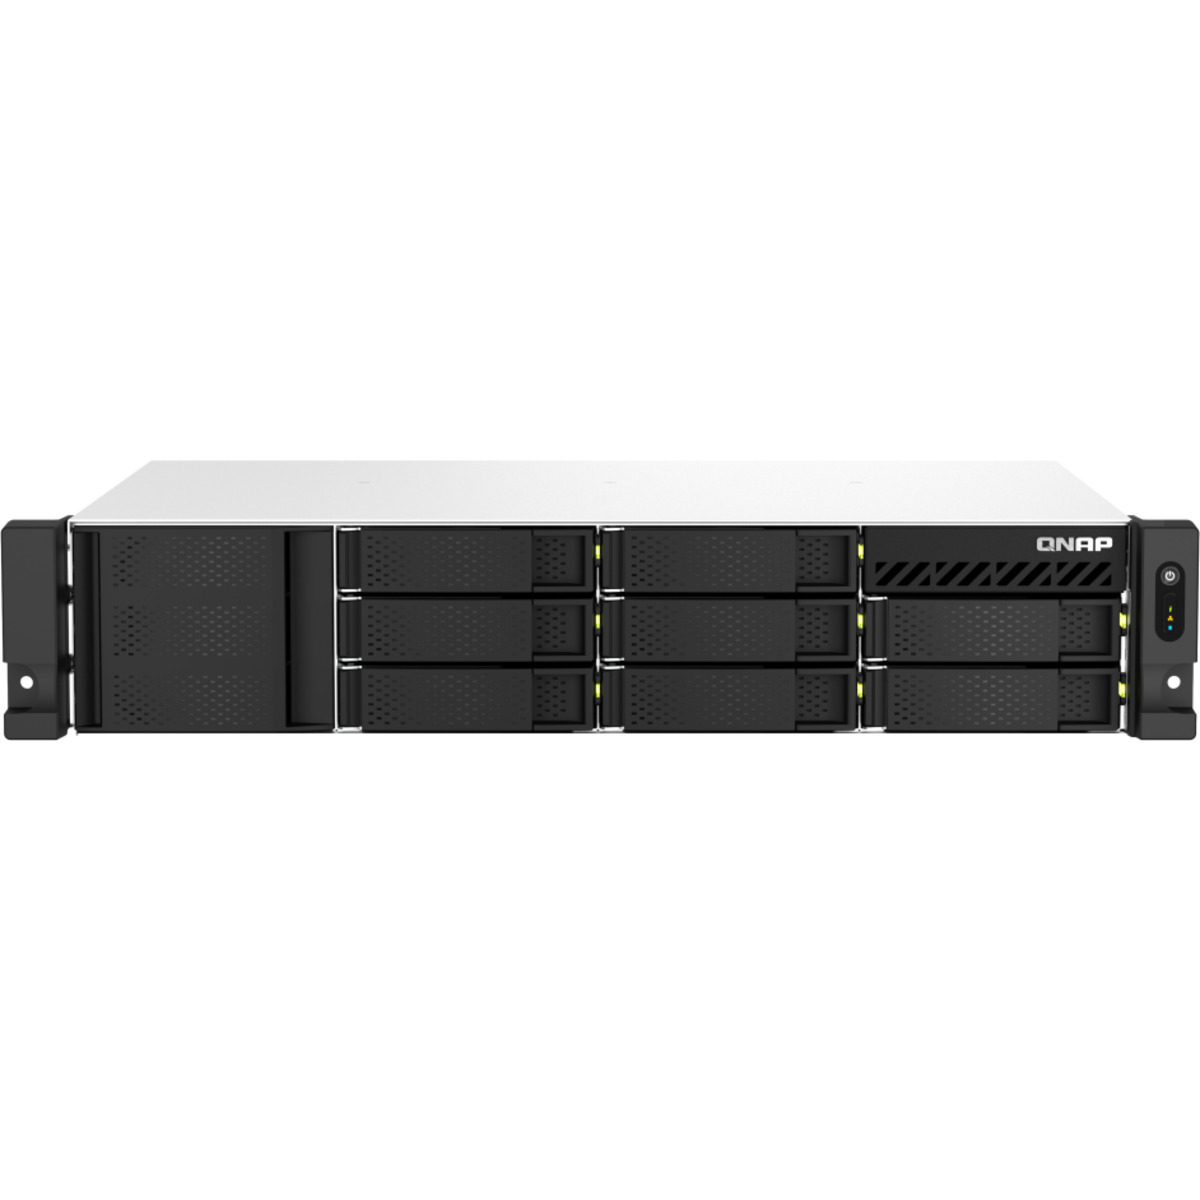 QNAP TS-873AeU-RP 30tb 8-Bay RackMount Multimedia / Power User / Business NAS - Network Attached Storage Device 5x6tb Western Digital Red Plus WD60EFPX 3.5 5640rpm SATA 6Gb/s HDD NAS Class Drives Installed - Burn-In Tested - FREE RAM UPGRADE TS-873AeU-RP